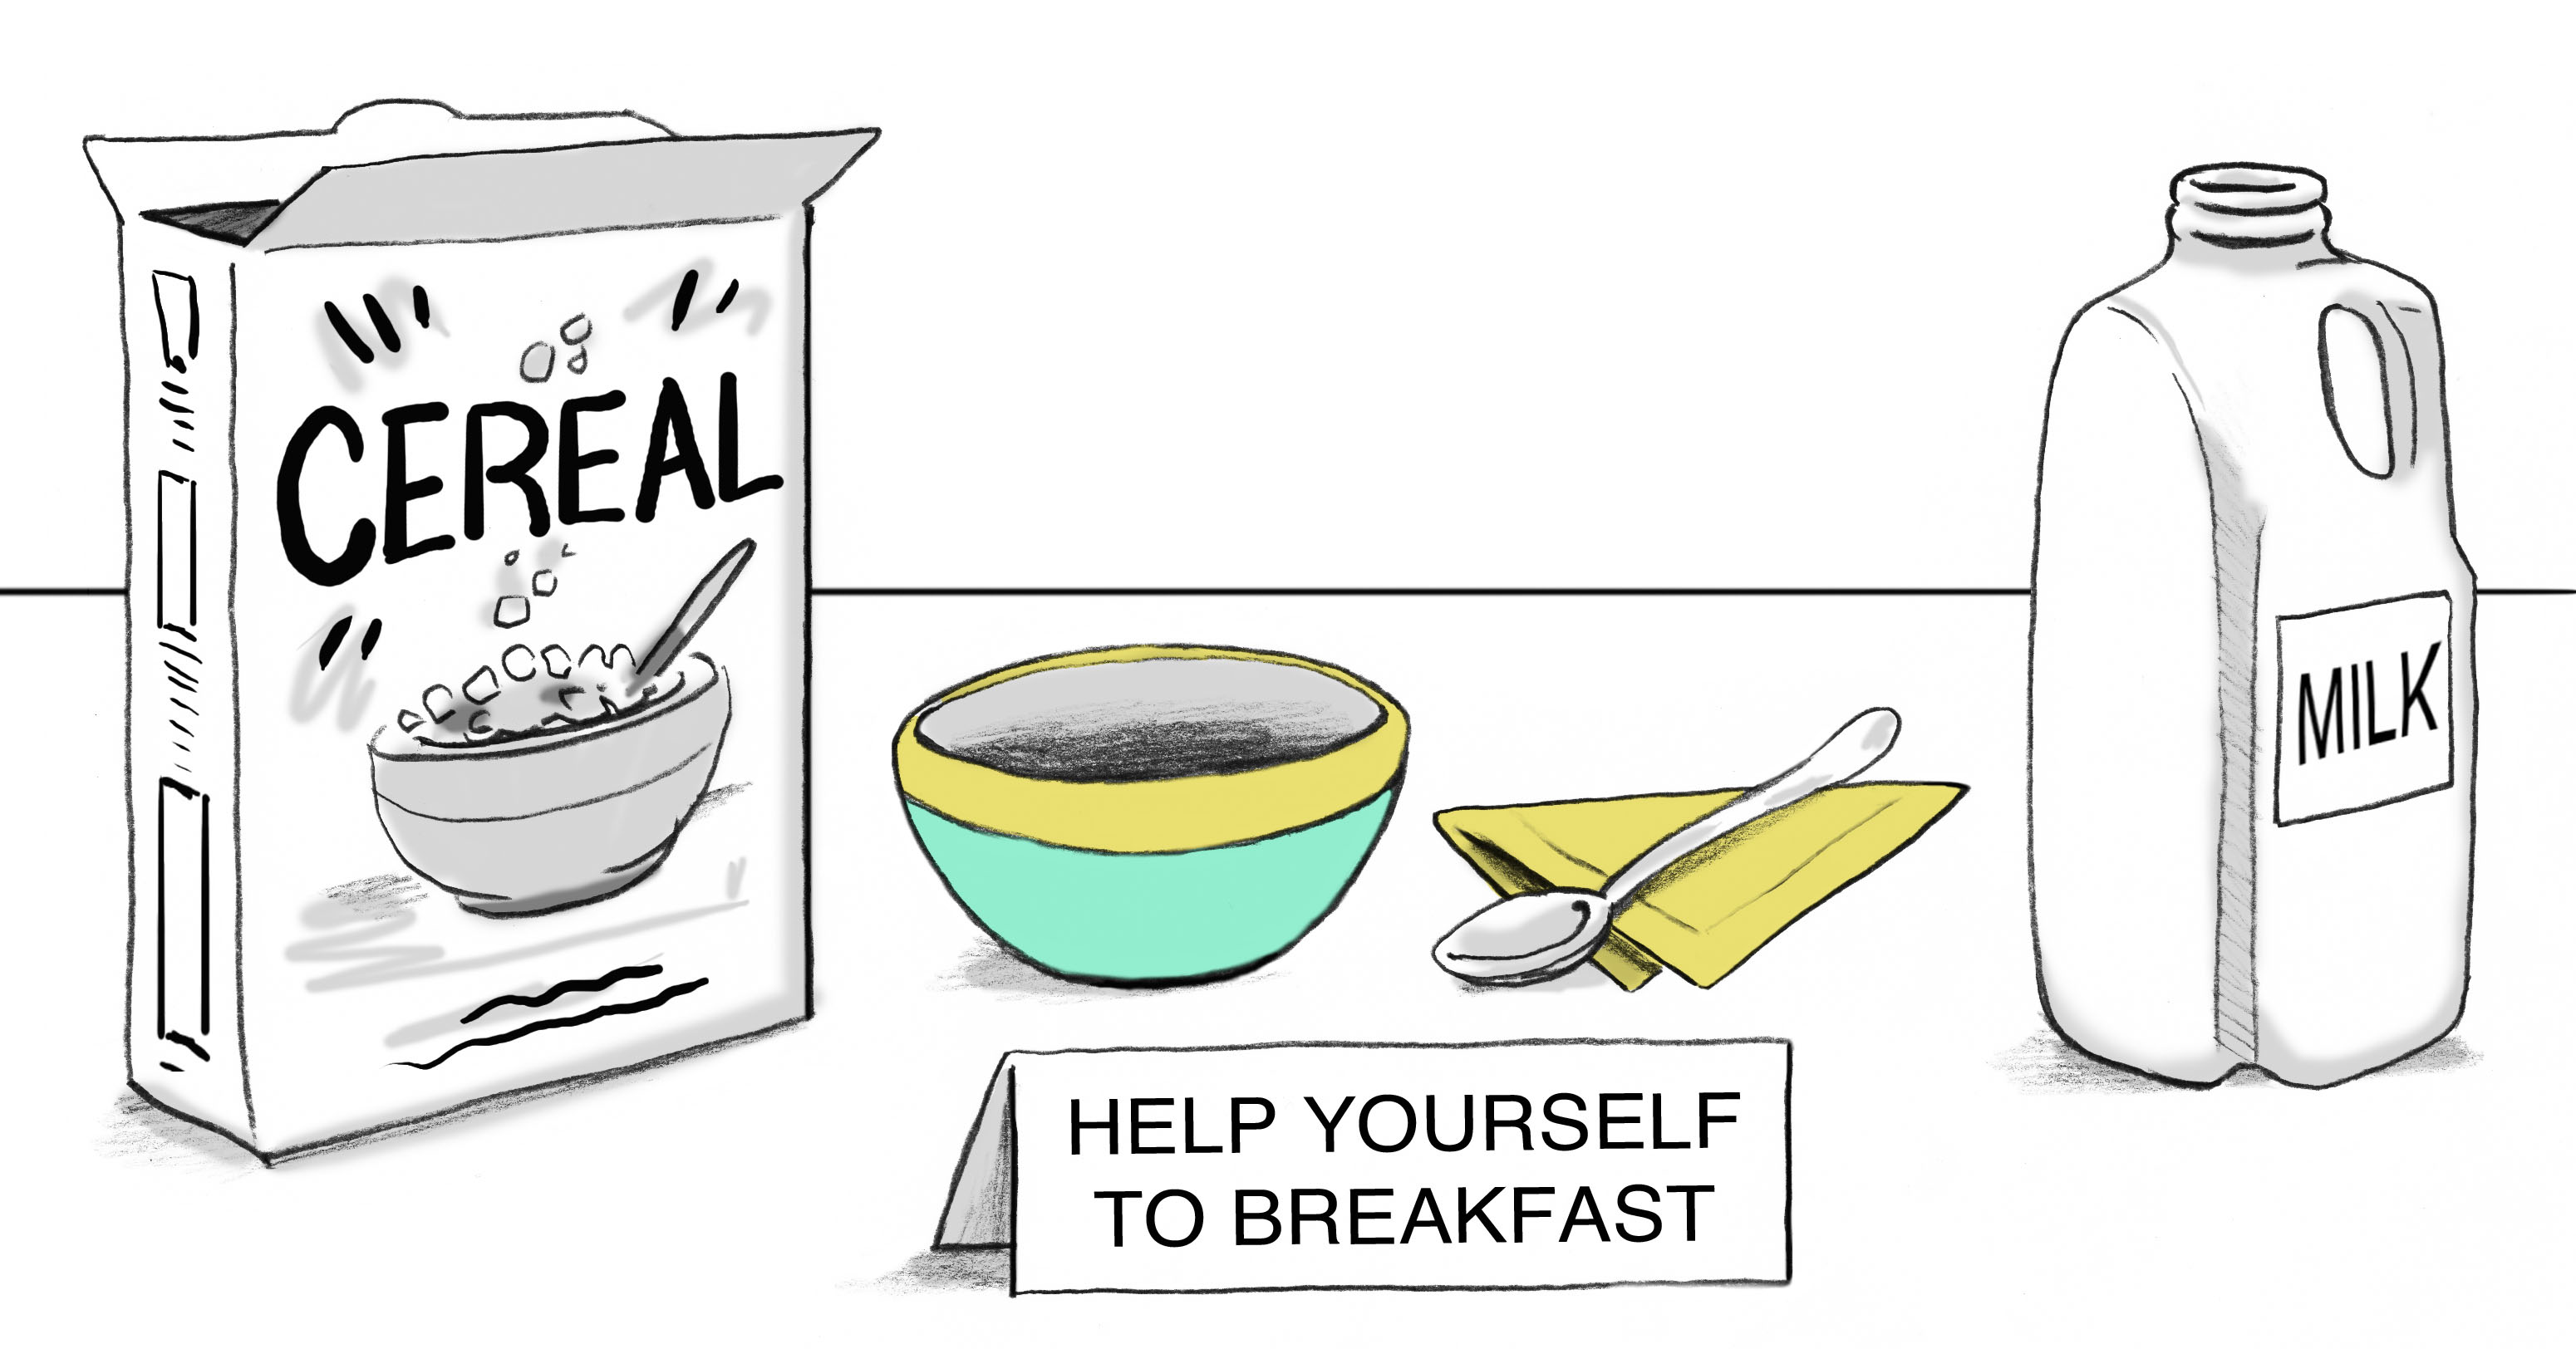 Signage: Help yourself to breakfast